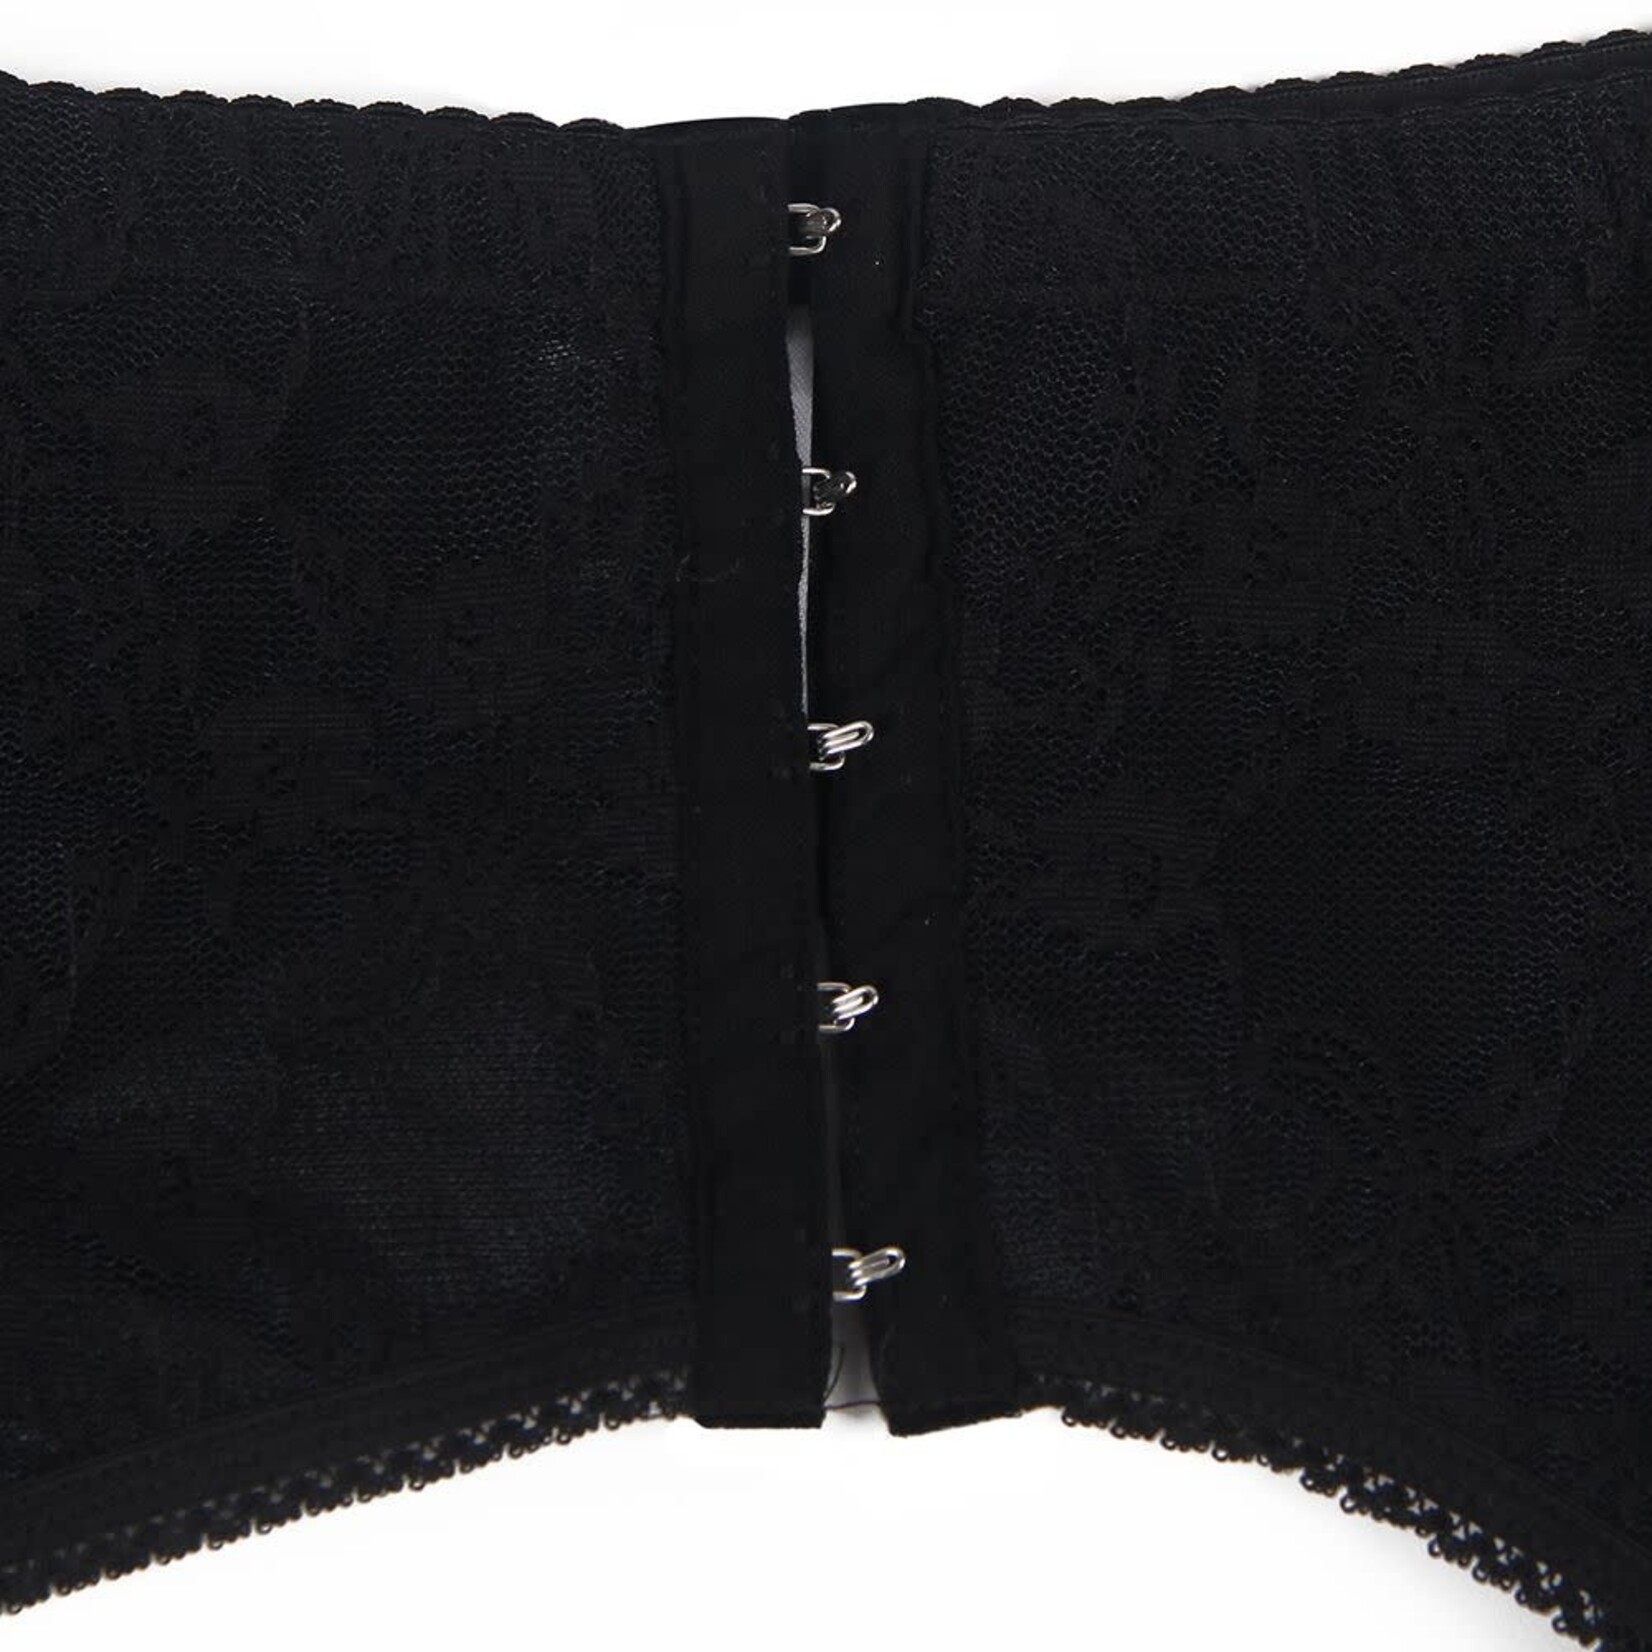 OH YEAH! -  BLACK SEXY LACE GARTER FIVE HOOK AND EYE PANTY XL-2XL